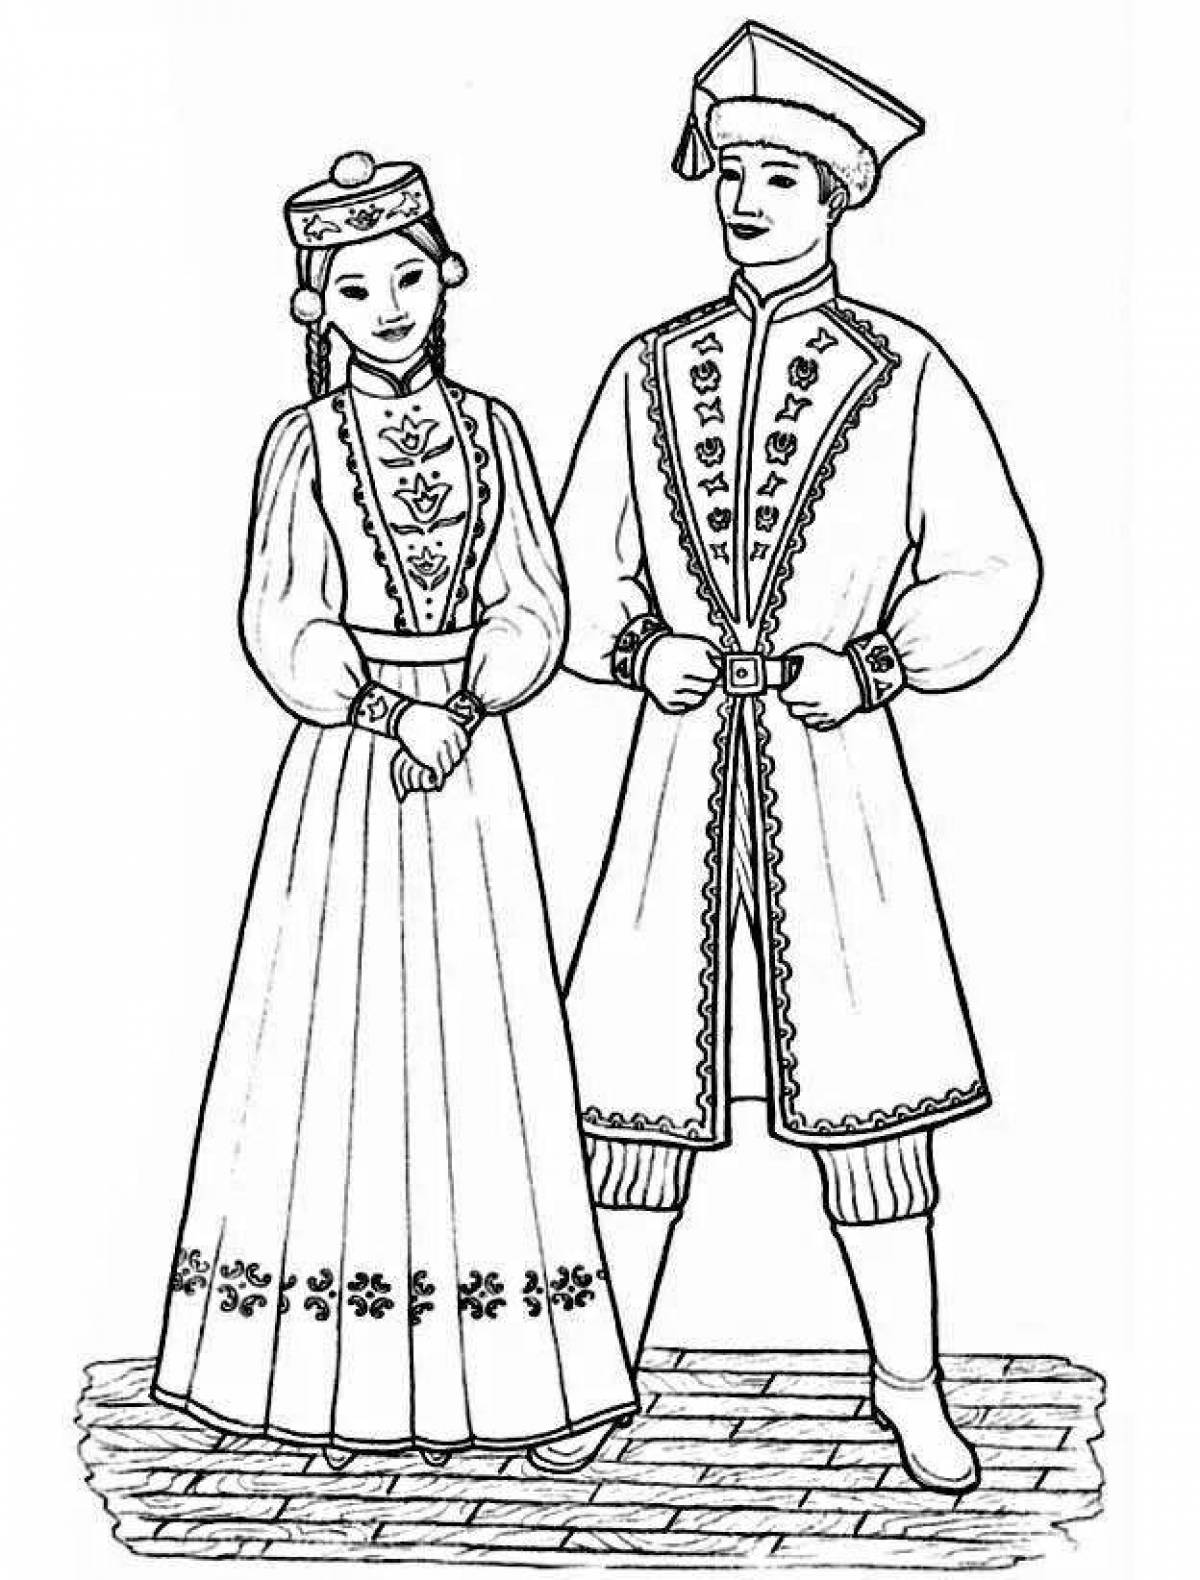 Intriguing coloring book in national costume